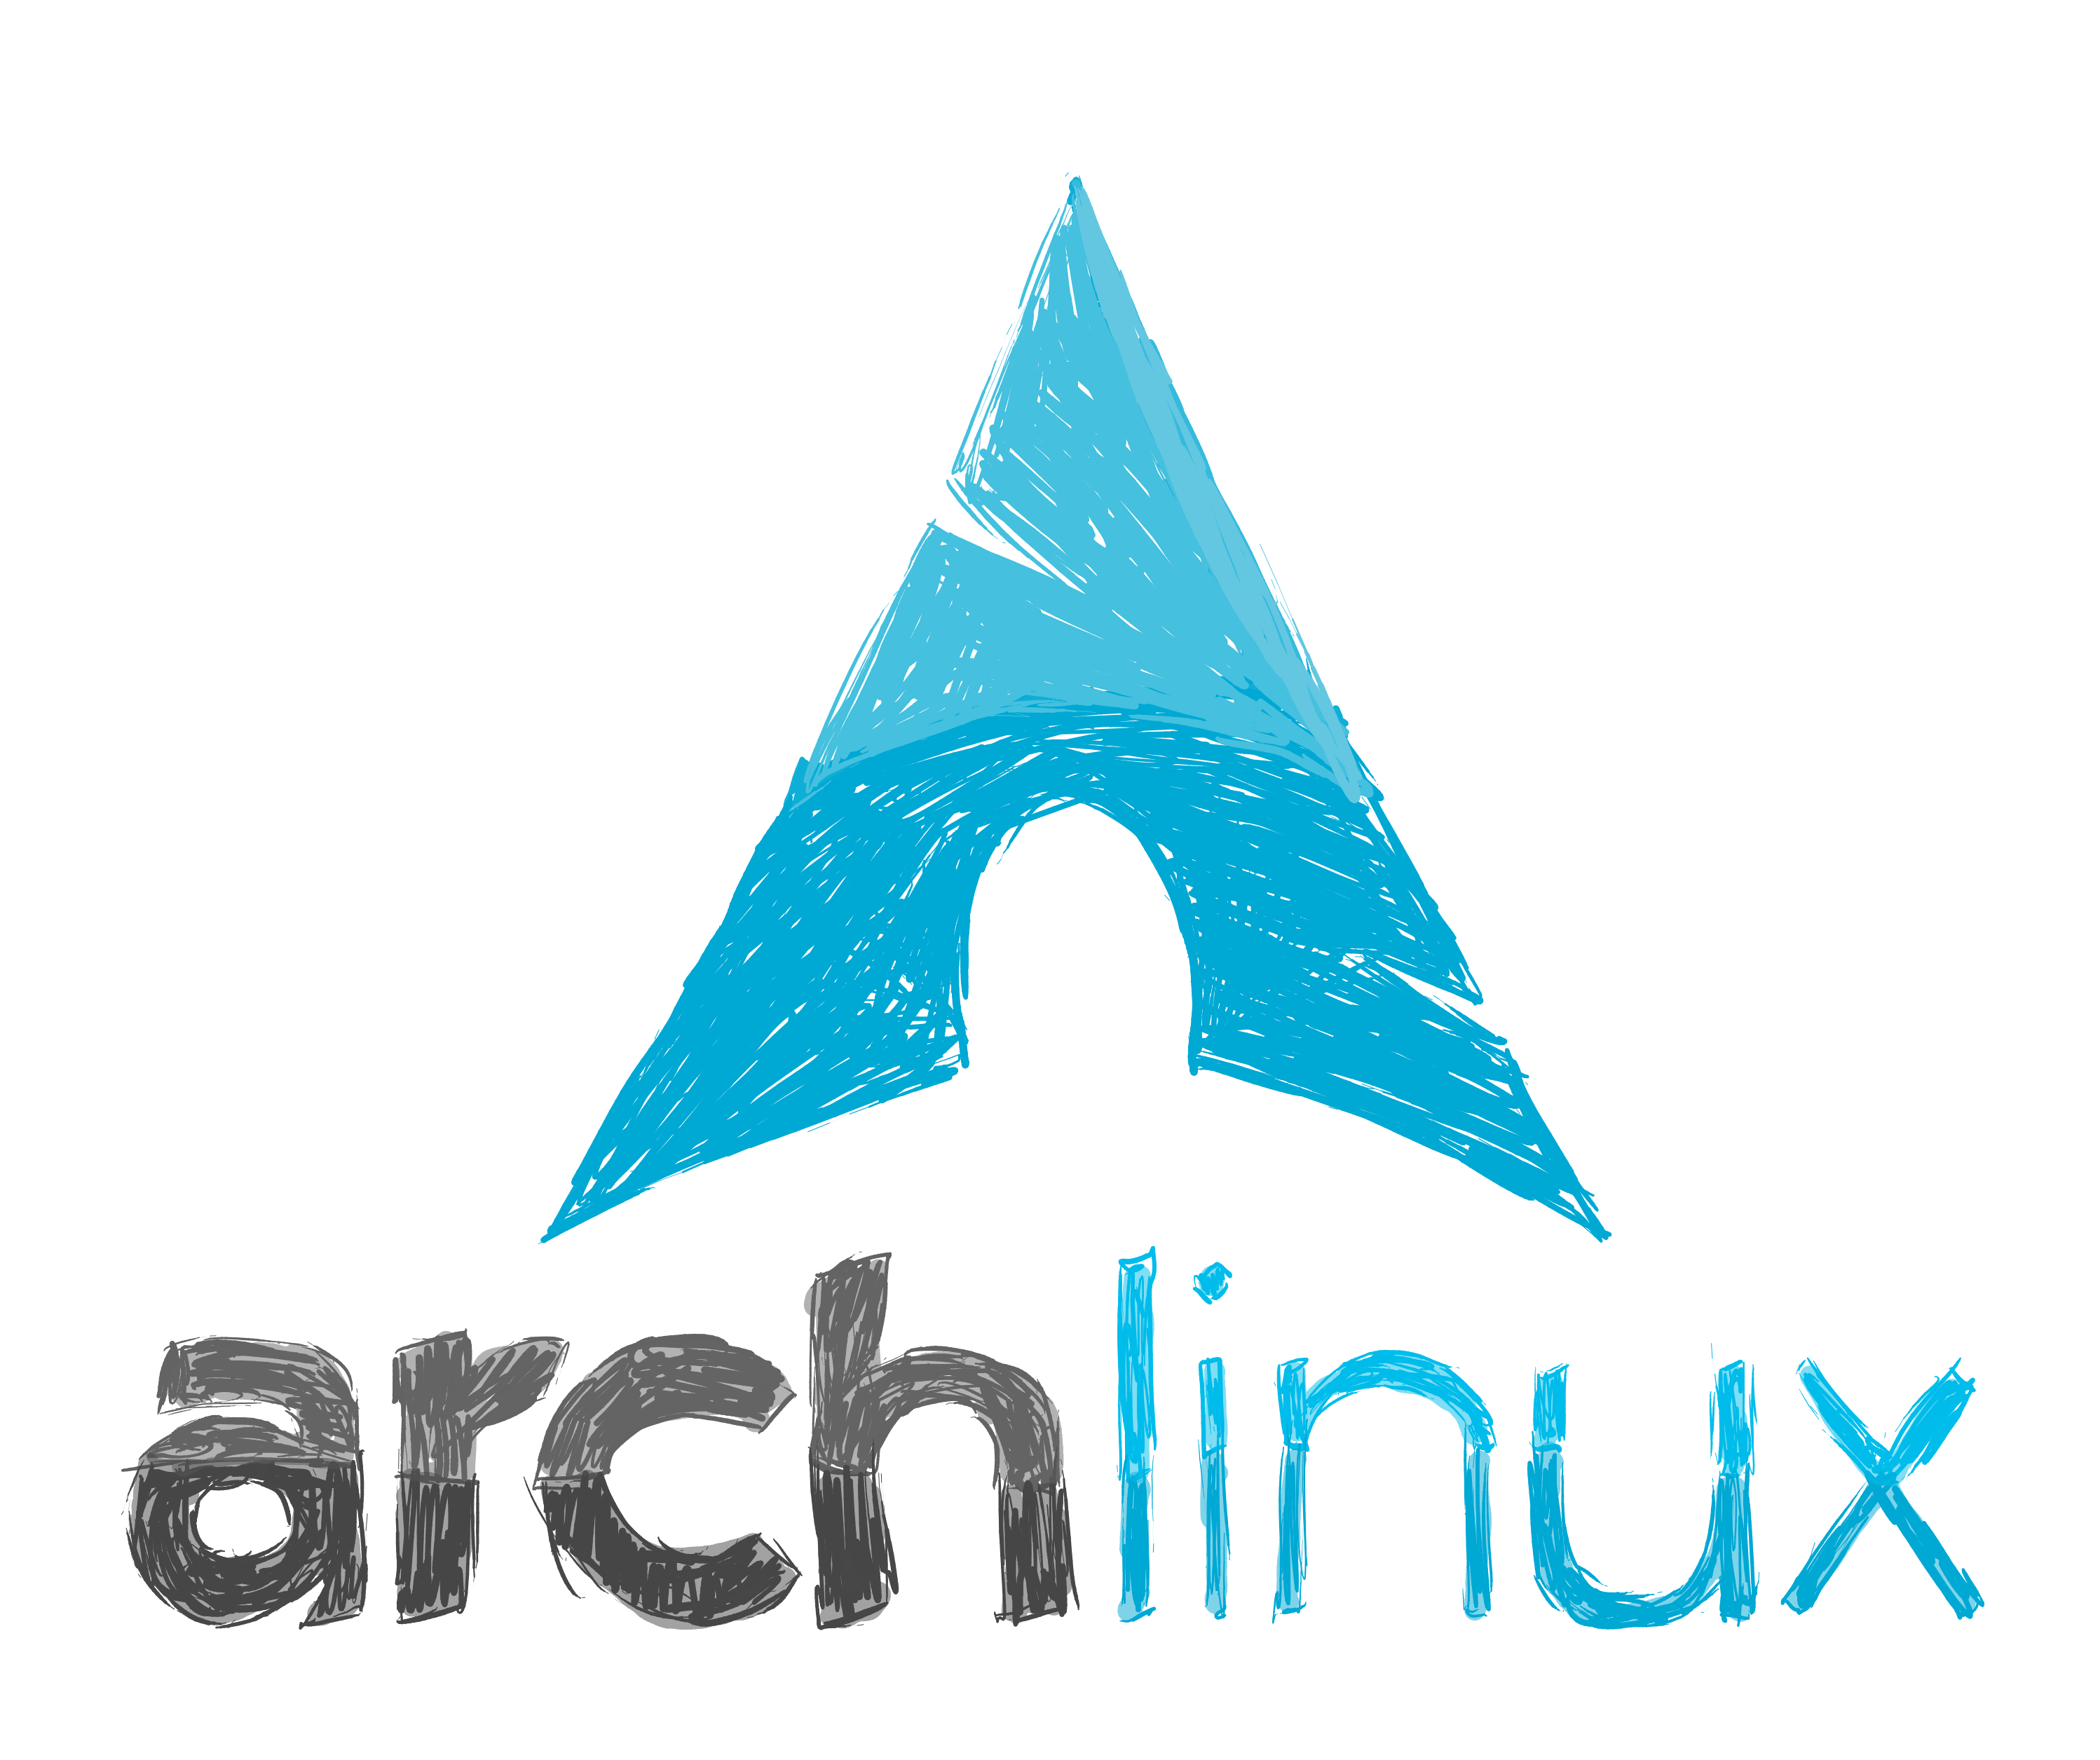 arch linux packages